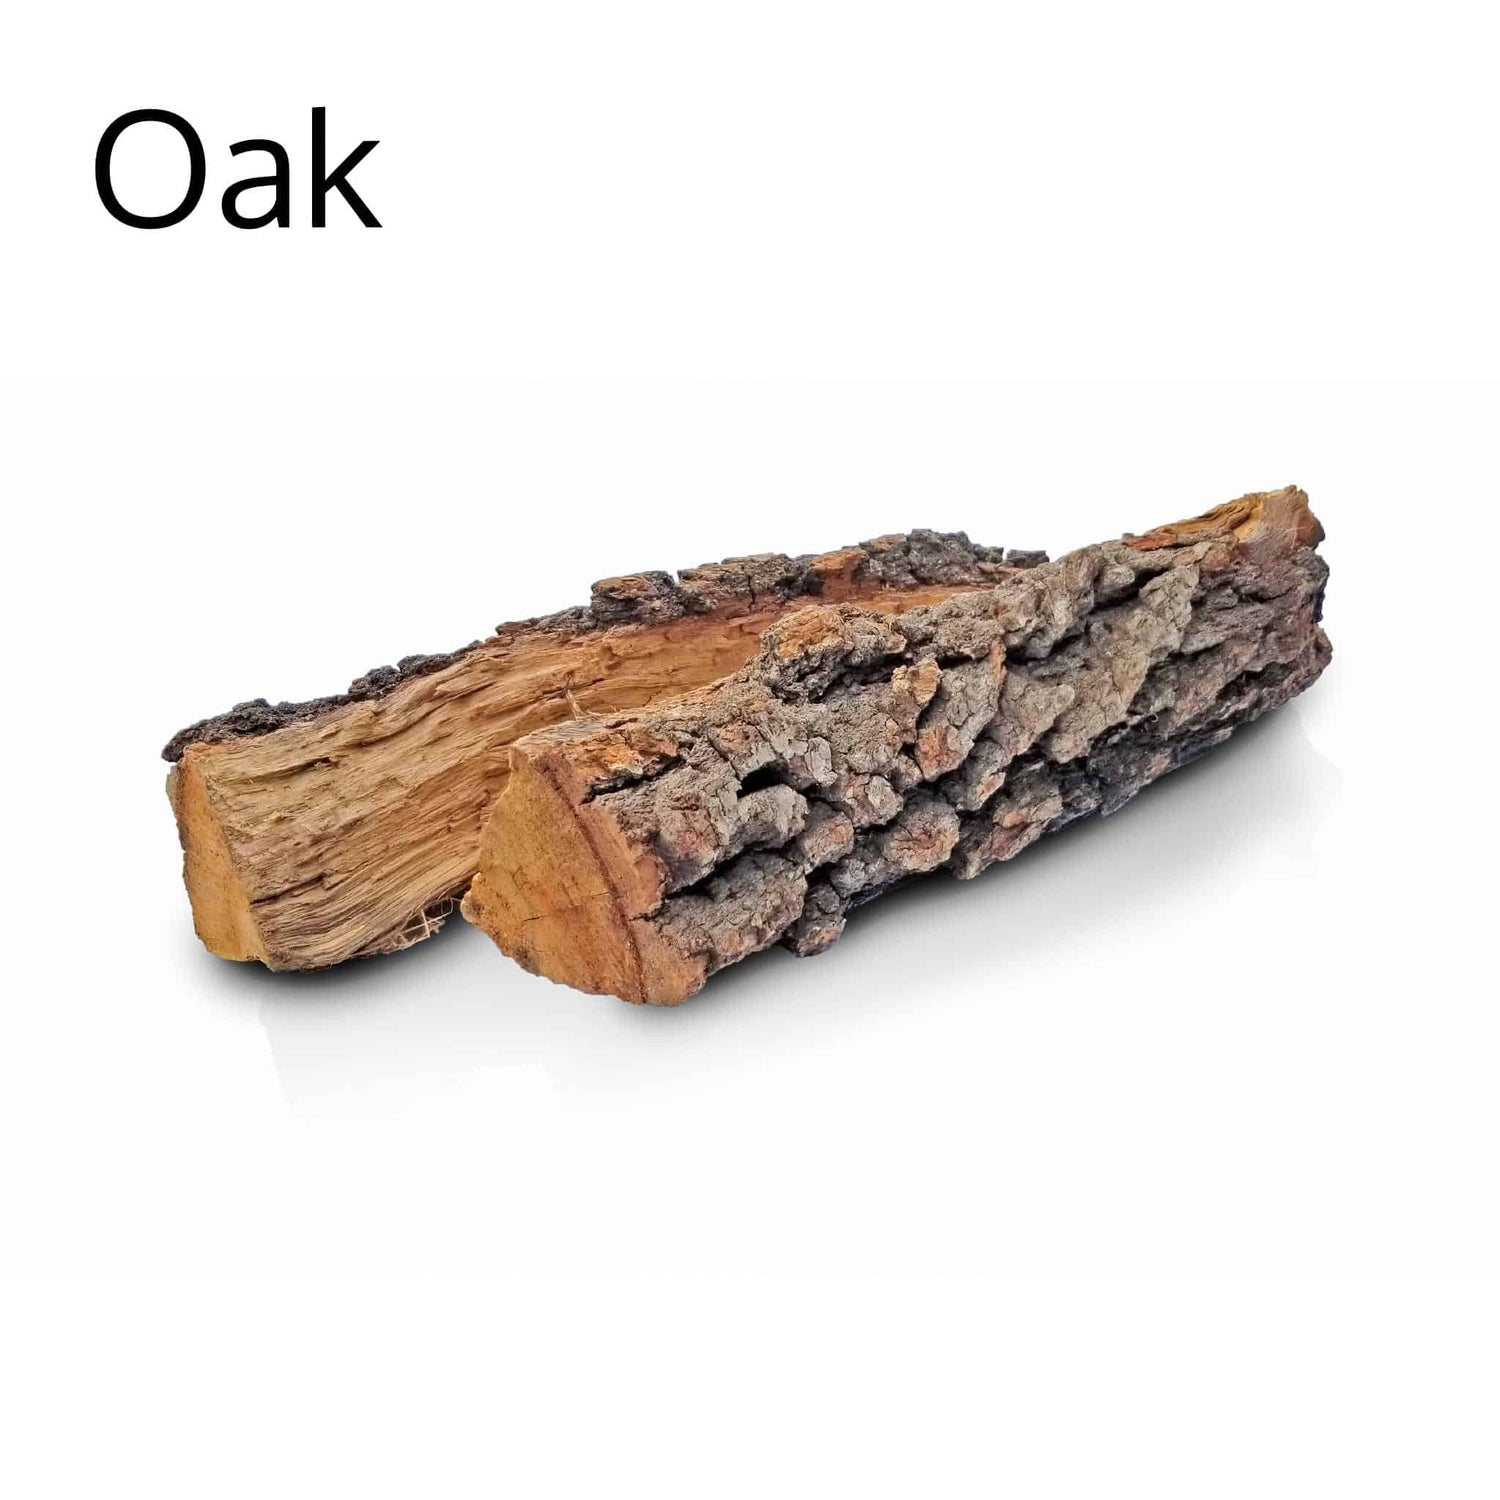 Top quality oak firewood, seasoned, very low moisture (guaranteed), local free delivery, carbon-neutral and from sustainable sources.